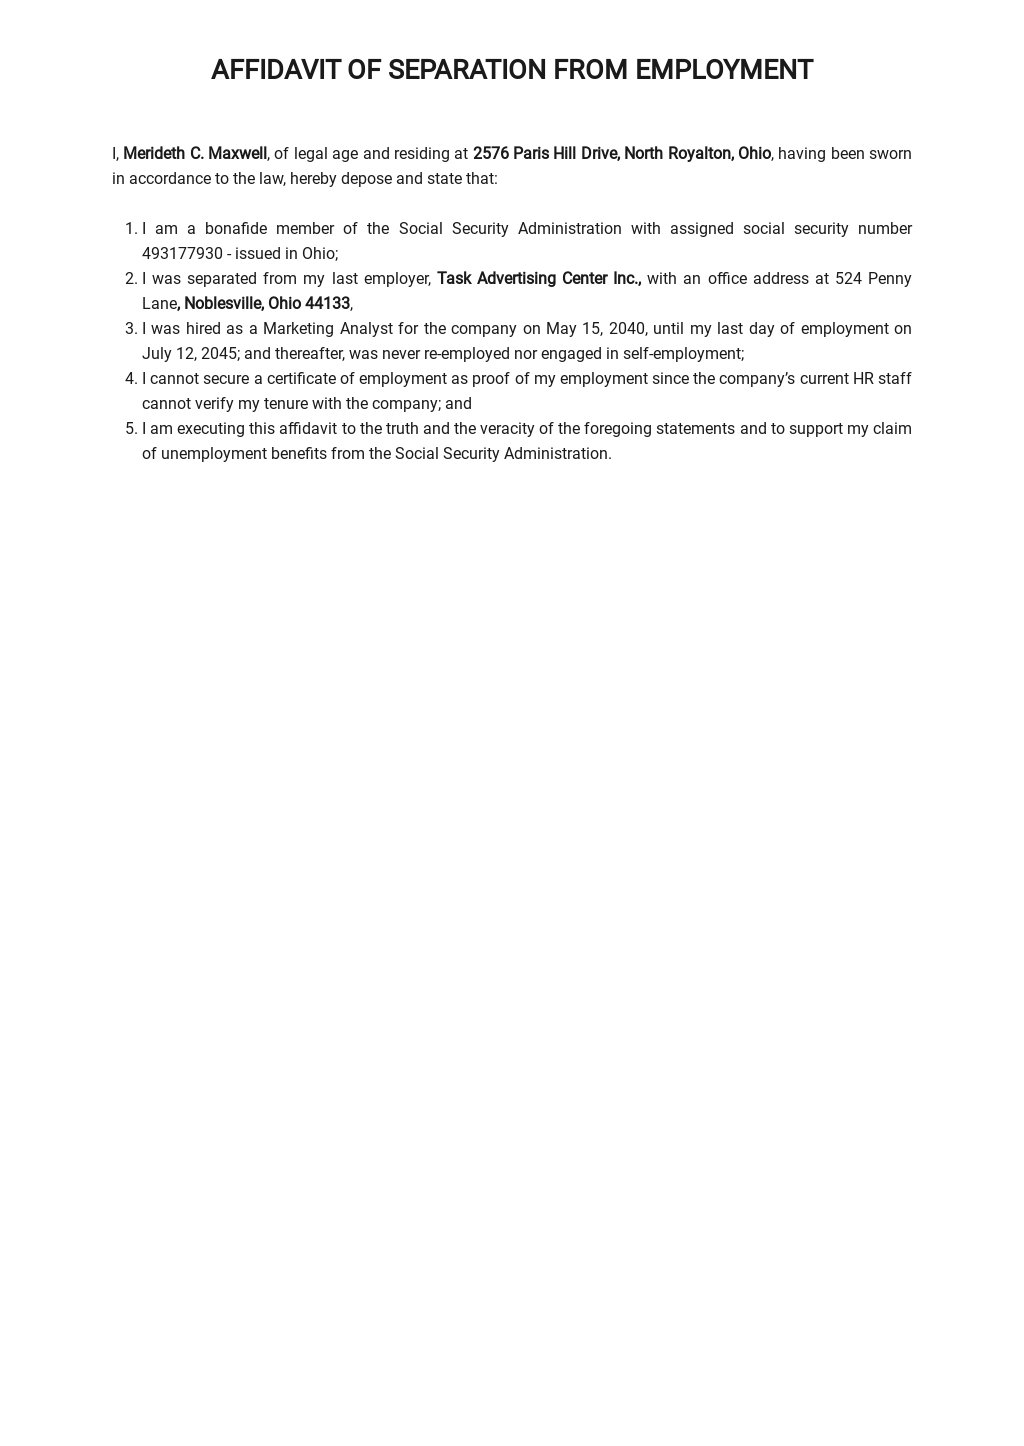 Affidavit of Separation from Employment Template in Word, Google Docs